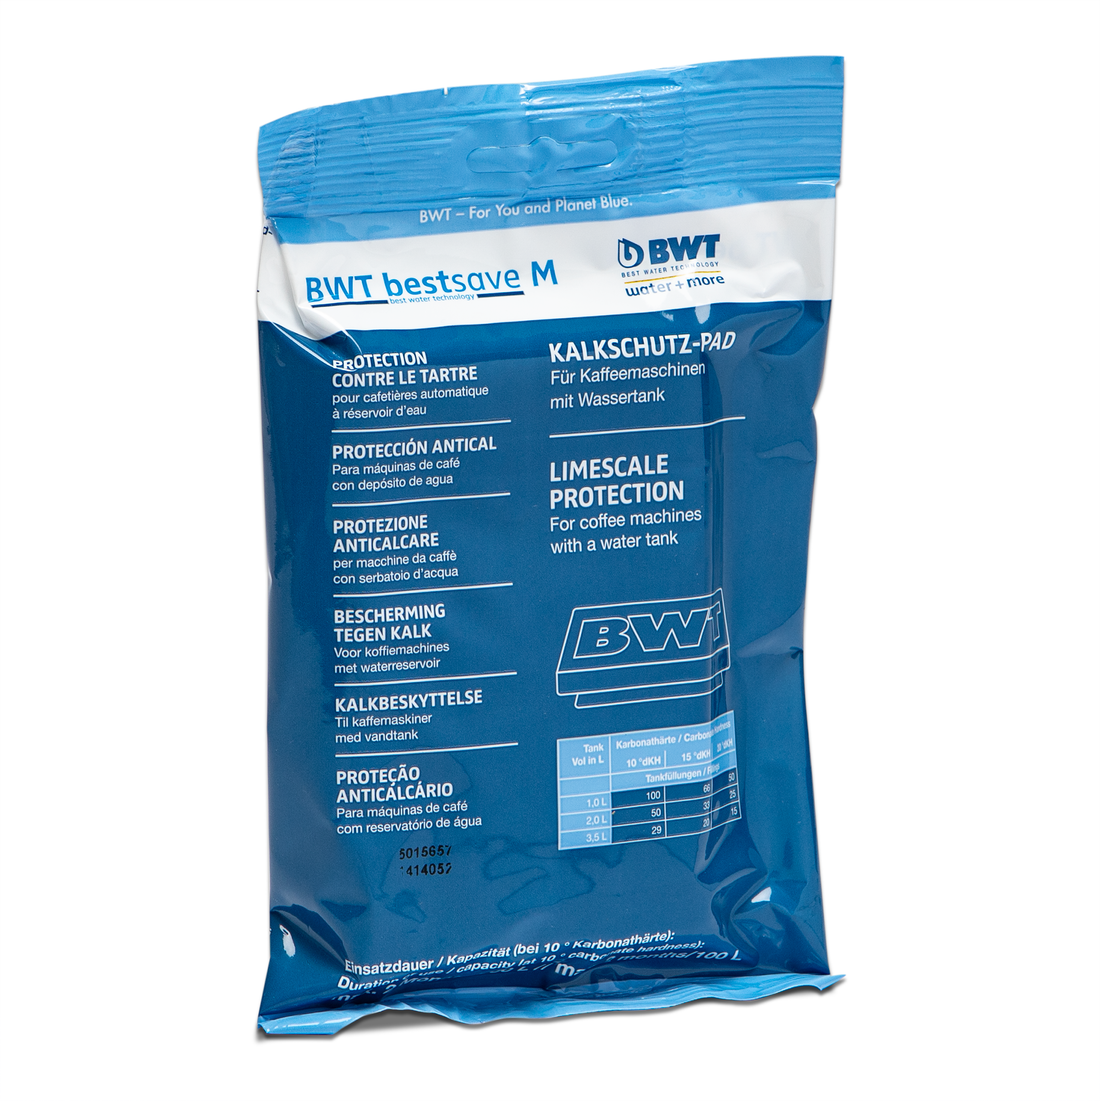 BWT Bestsave M - 6 Pack 1 Year Supply